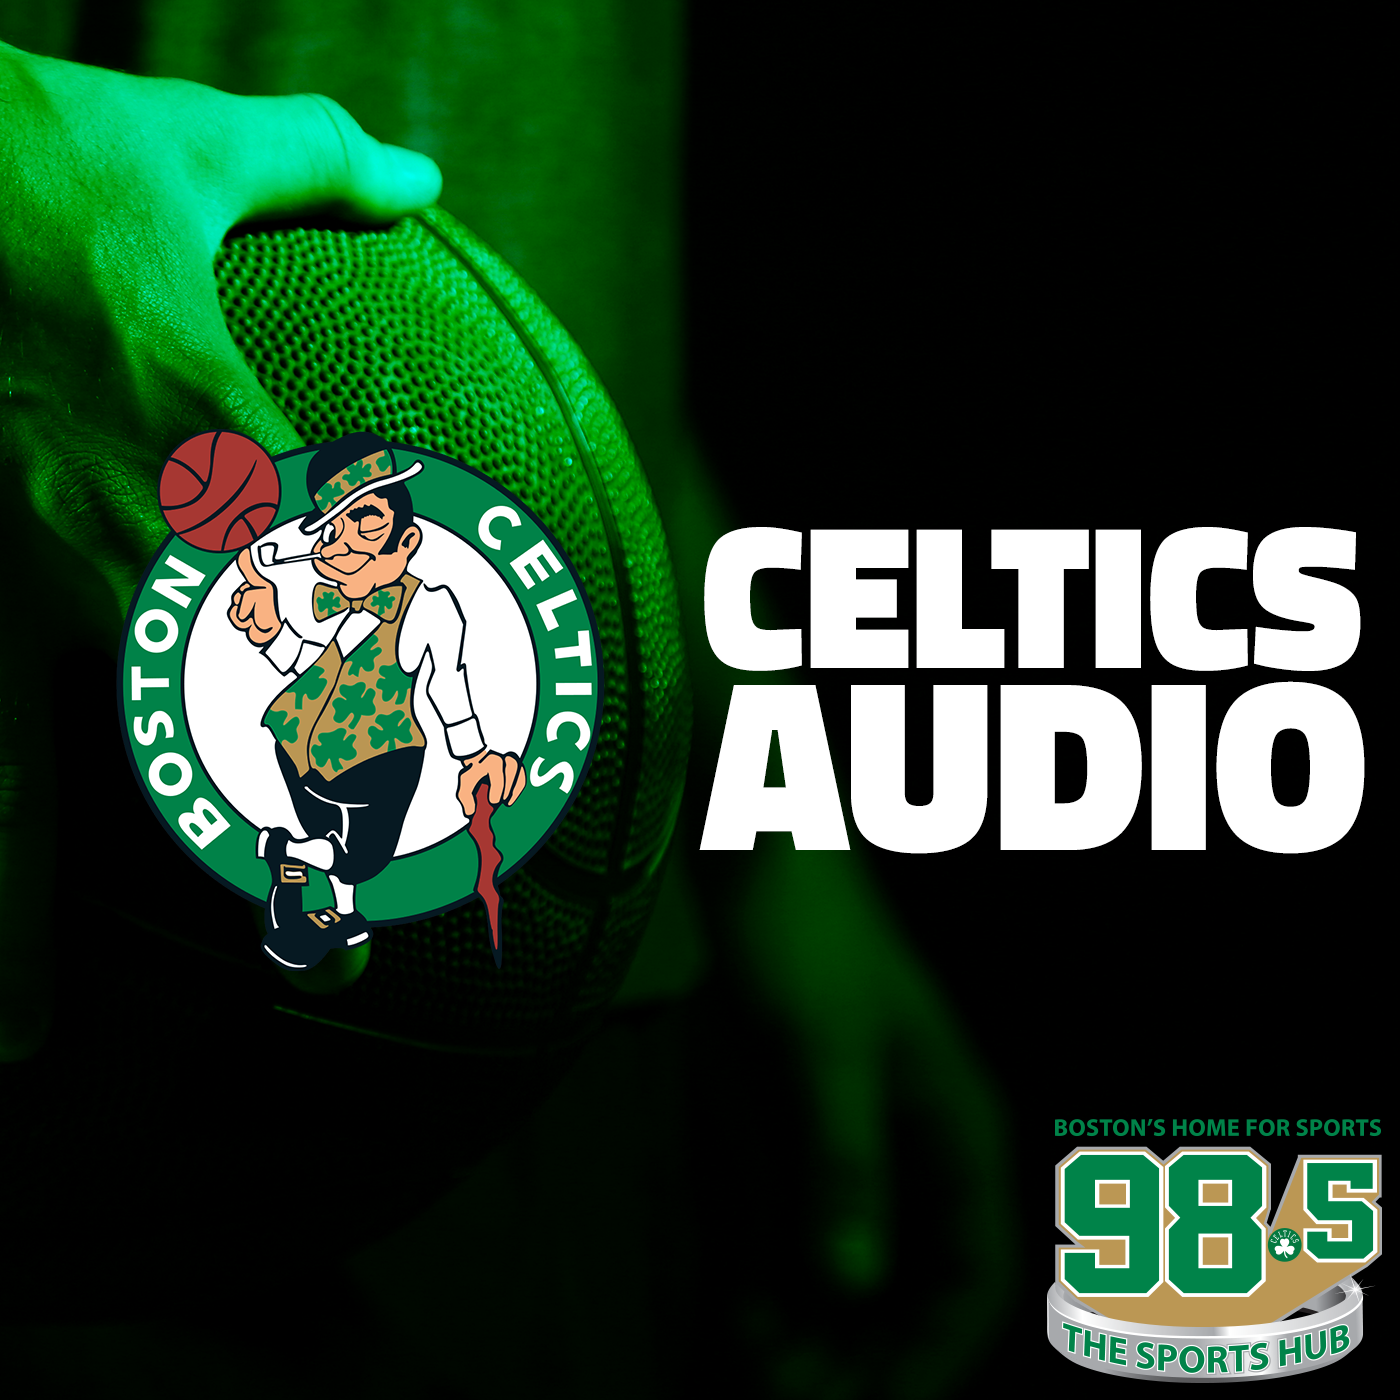 Al Horford joins Grande and Max after the Celtics 102-88 win over the Miami Heat